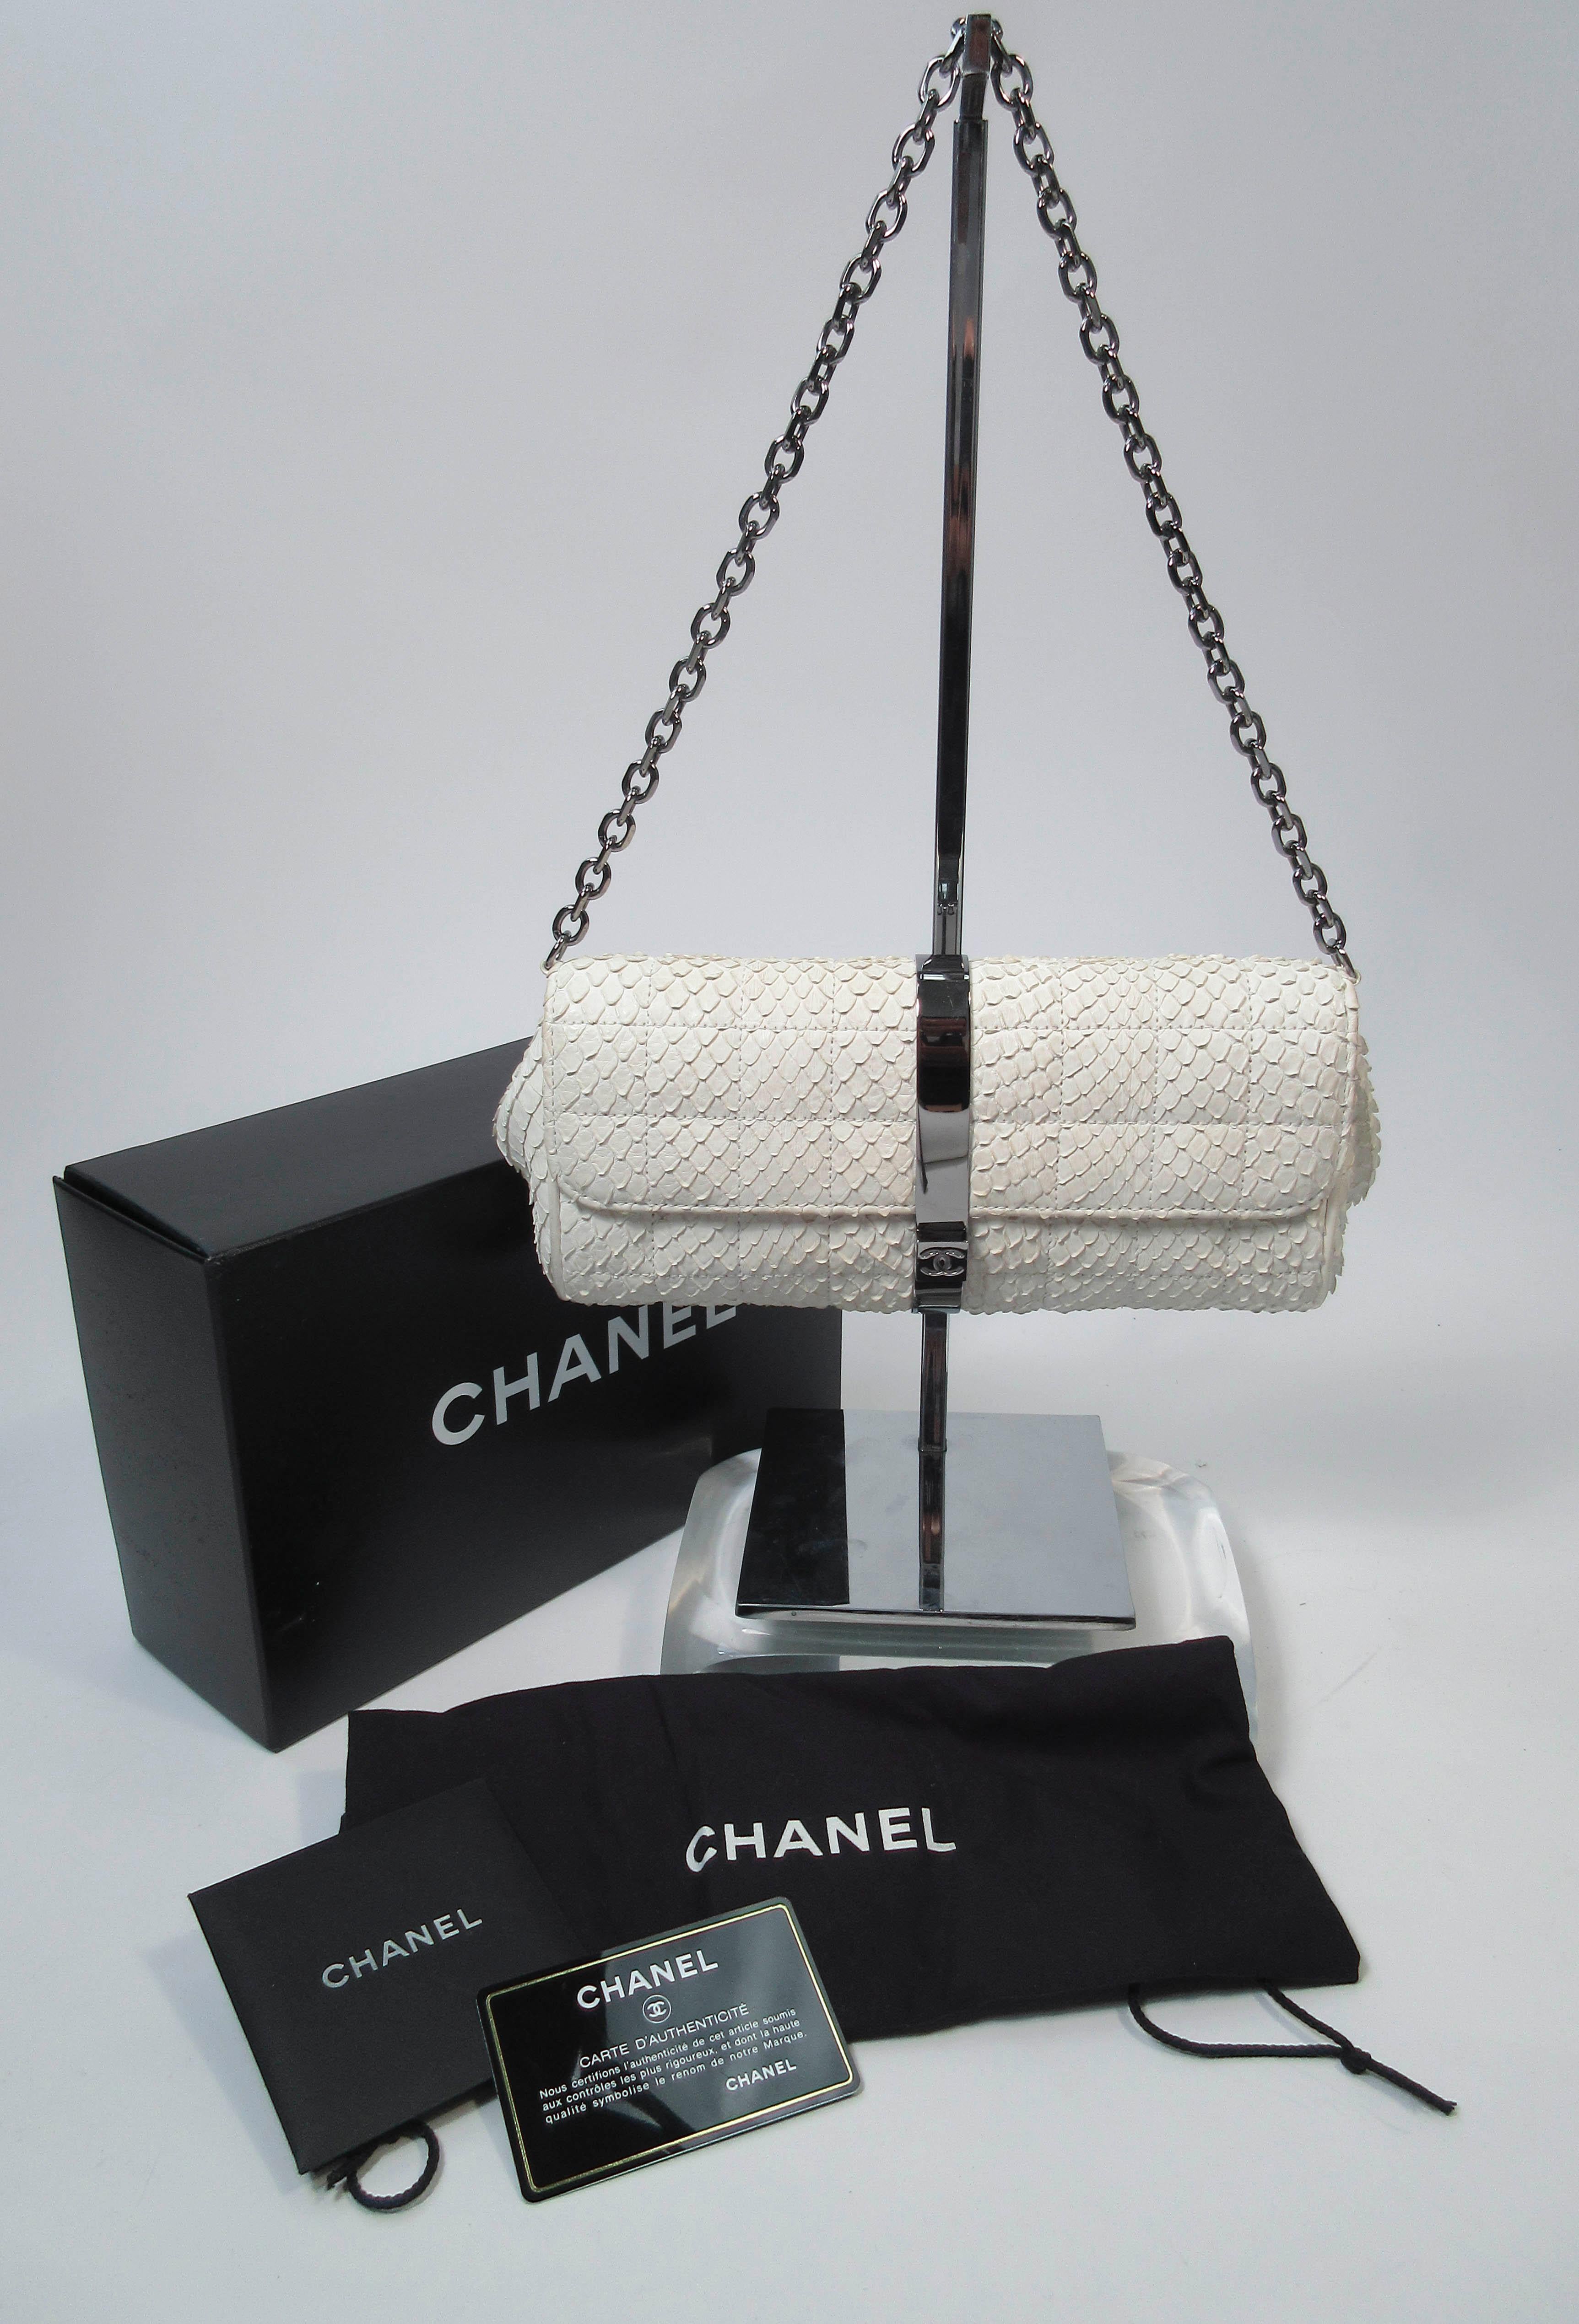 Chanel White Snakeskin Small Chain Clutch Purse with Silvertone Hardware 5